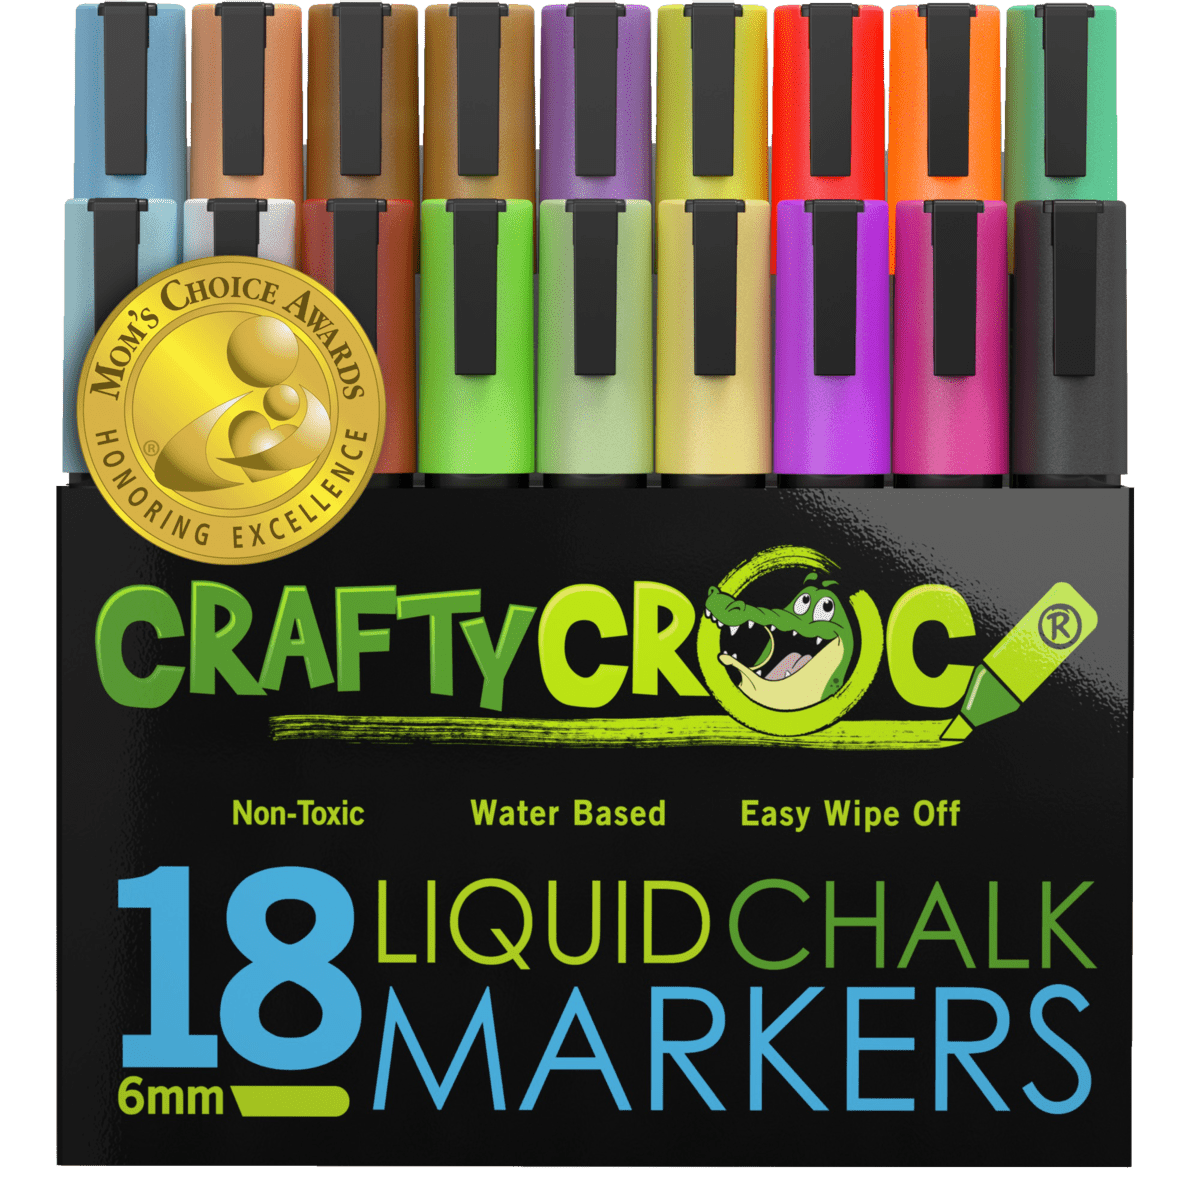  18 Classic Neon Chalk Markers Double Pack of Both